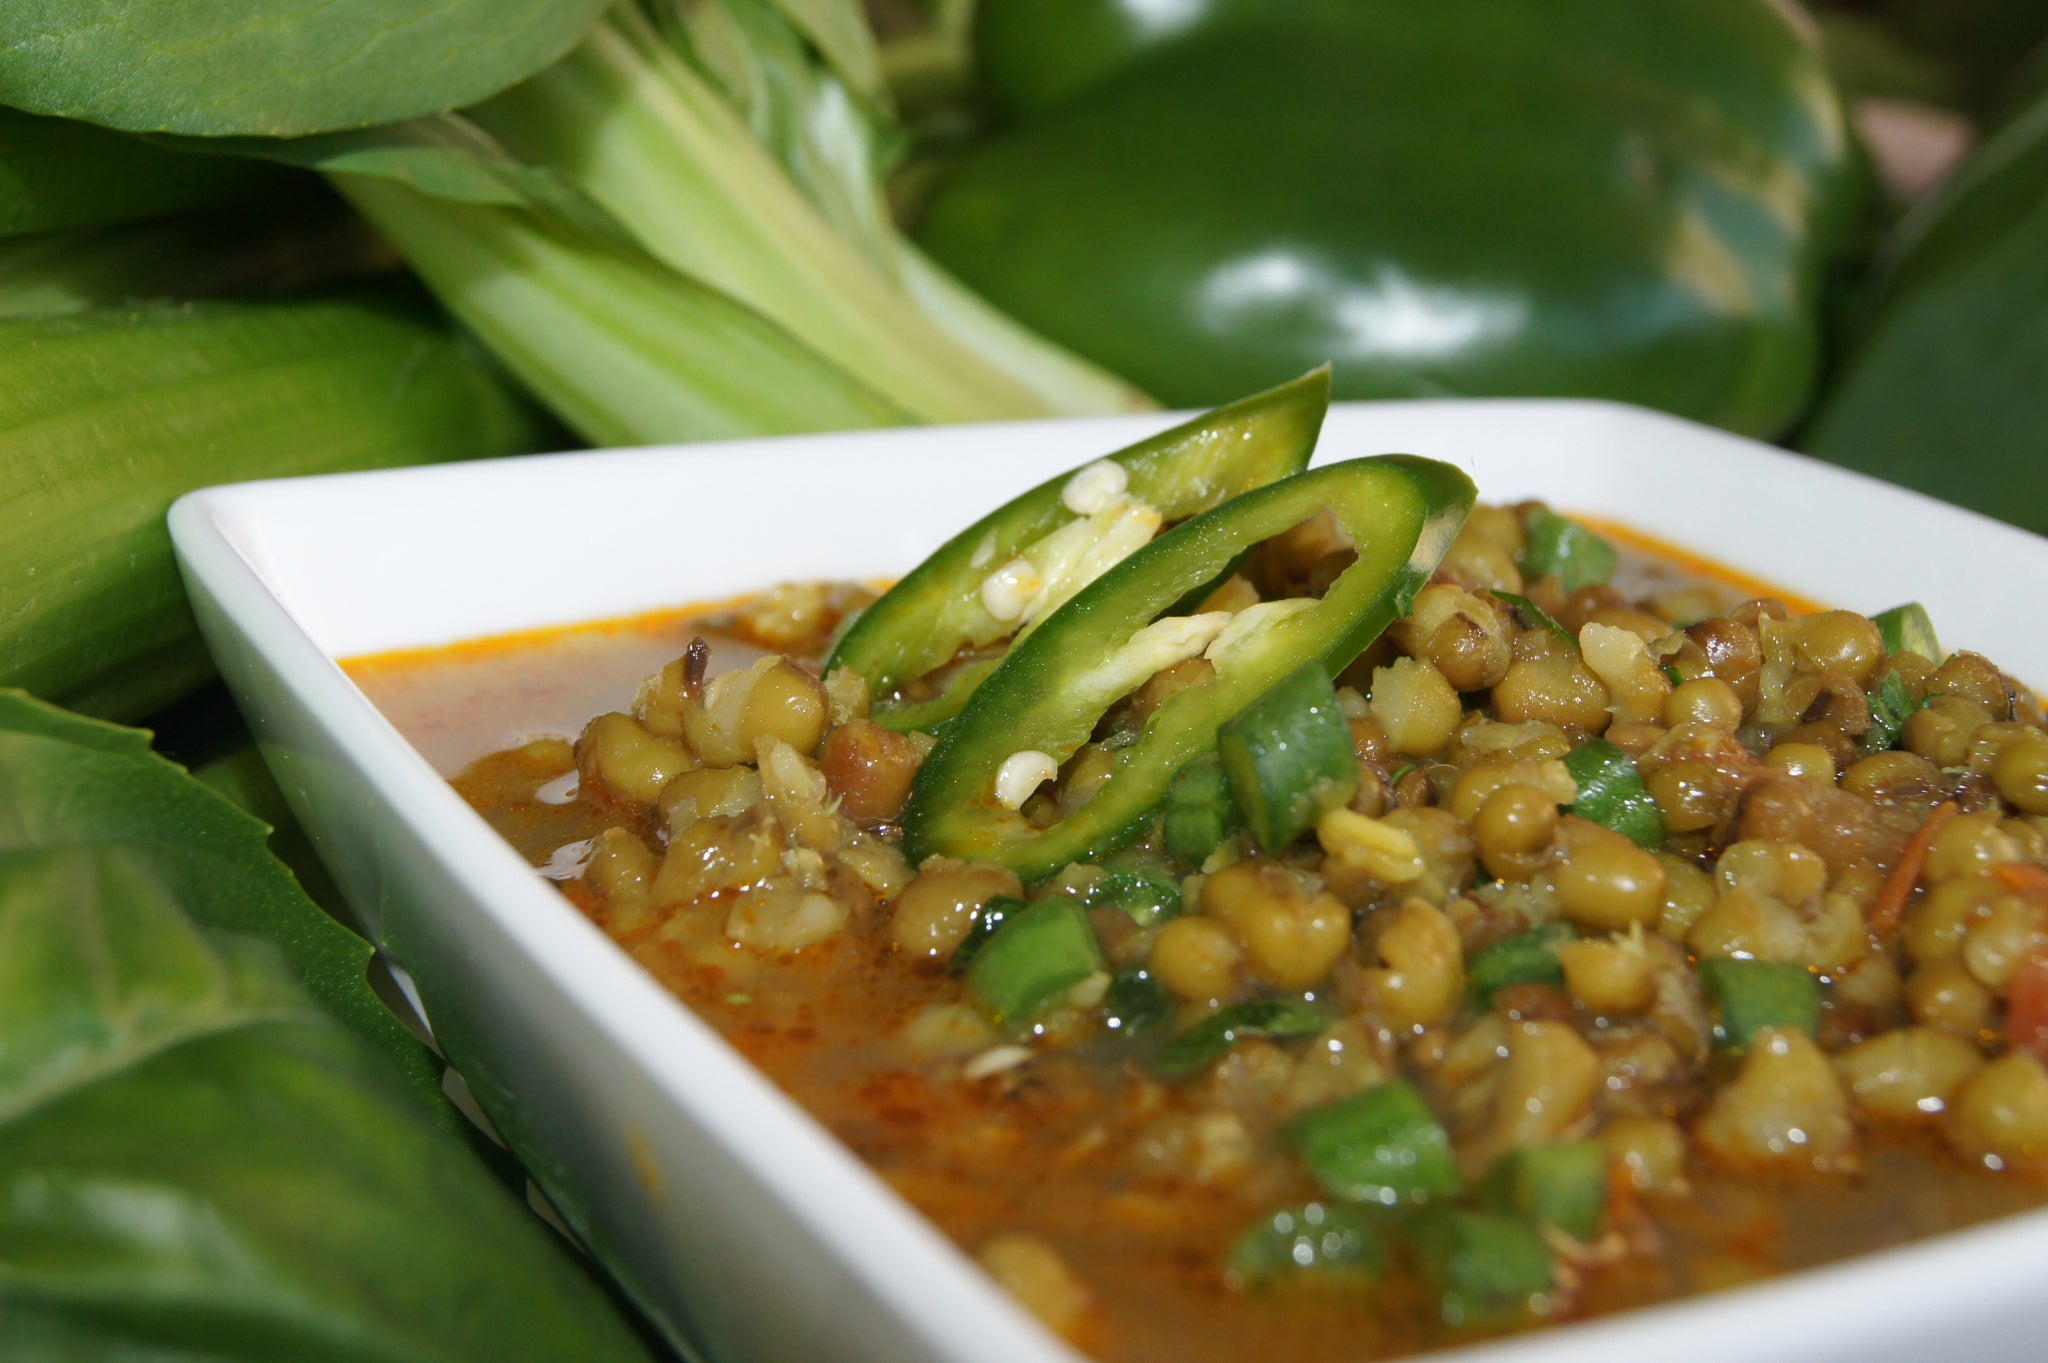 our green moong dhal is perfect on its own or as a base for your creation. cooked with los of green veggies and topped with delicious fresh jalapeños. yummy dhal or dahl is authentic and wholesome to traditional Ayurveda diets